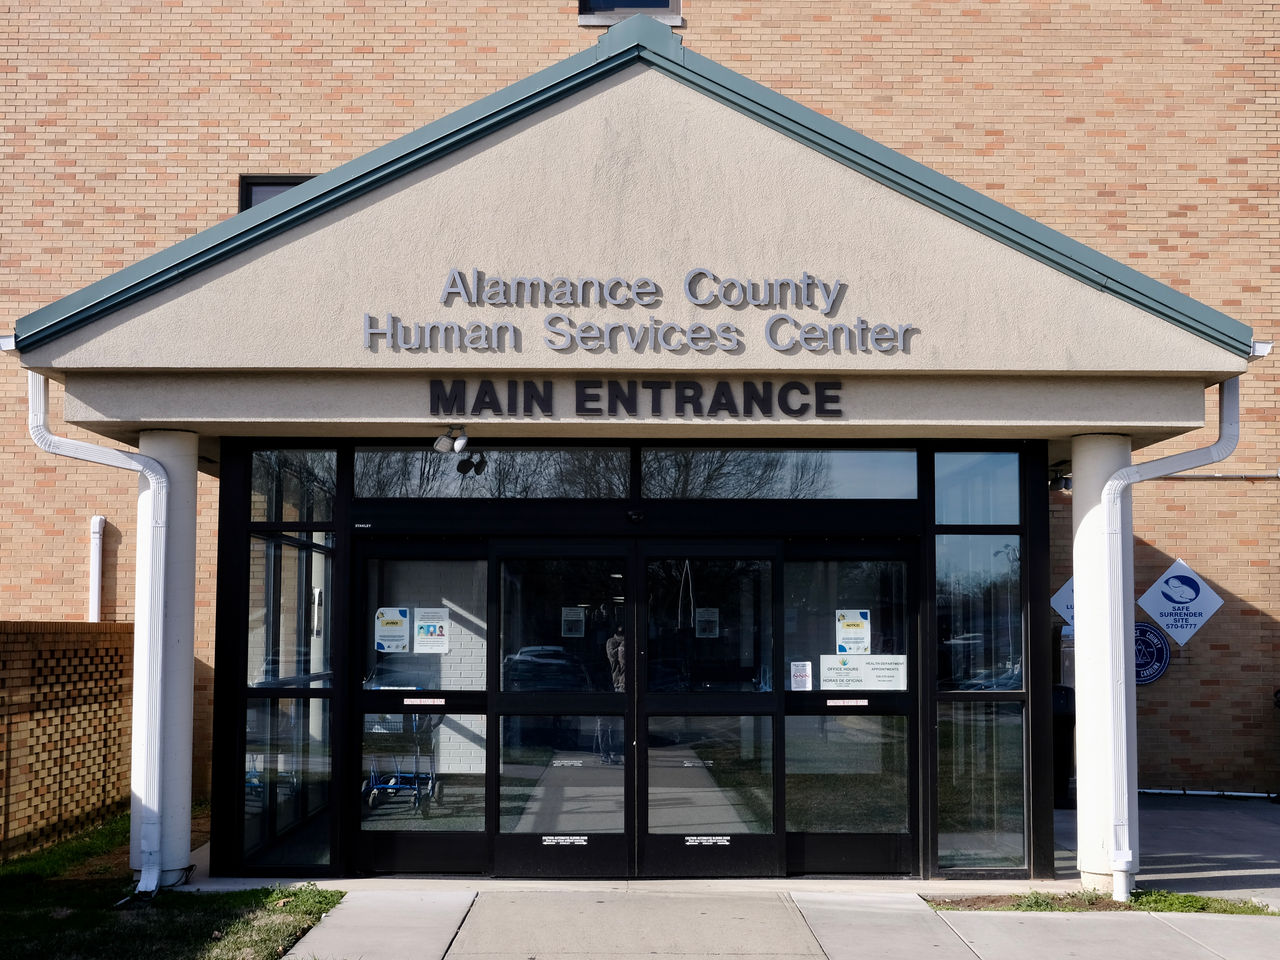 Photo of the Alamance County Human Services Center